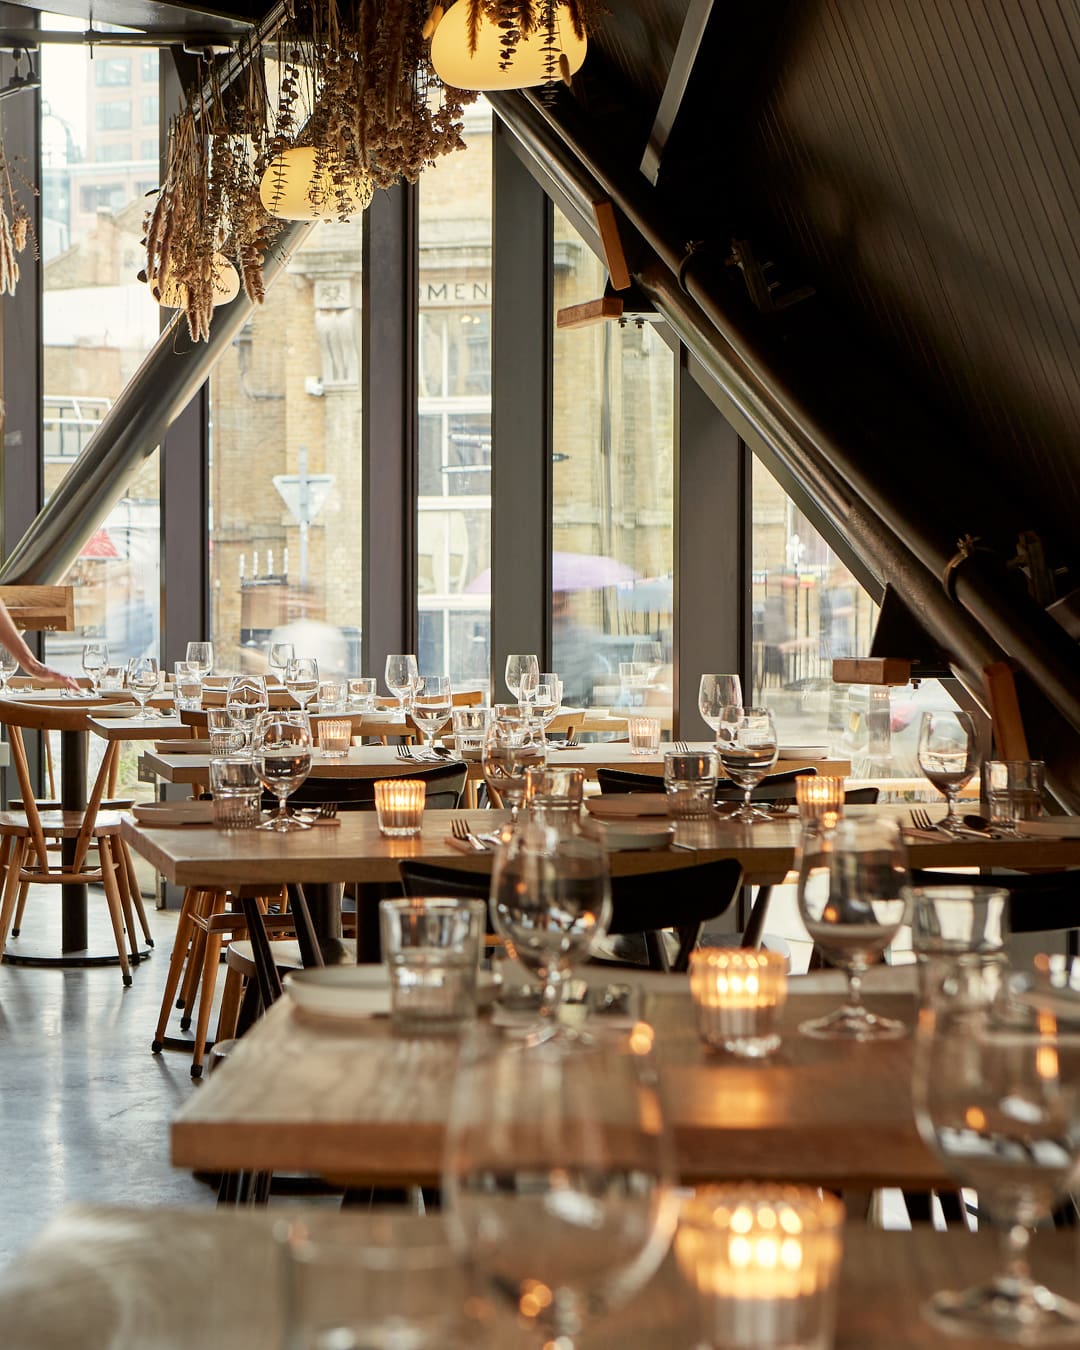 The best restaurants in Shoreditch and Spitalfields | Crispin is a glass-walled restaurant serving European small plates